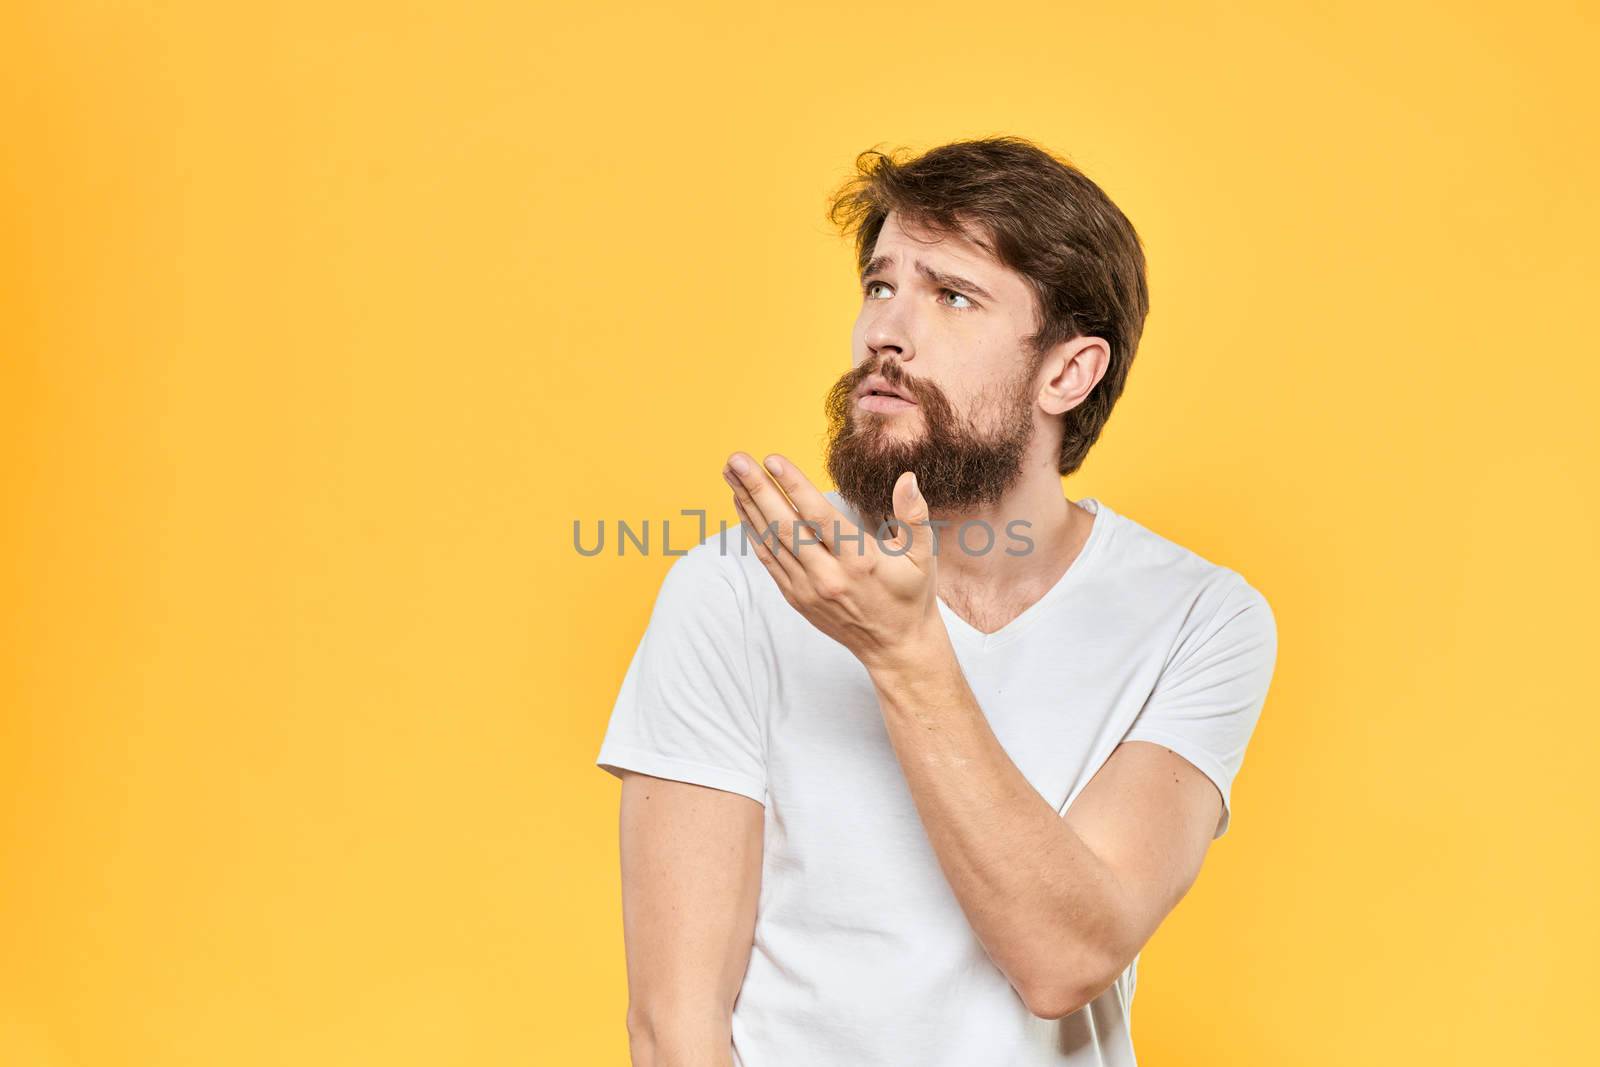 Bearded man emotions gestures with hands facial expression white t-shirt yellow background. High quality photo